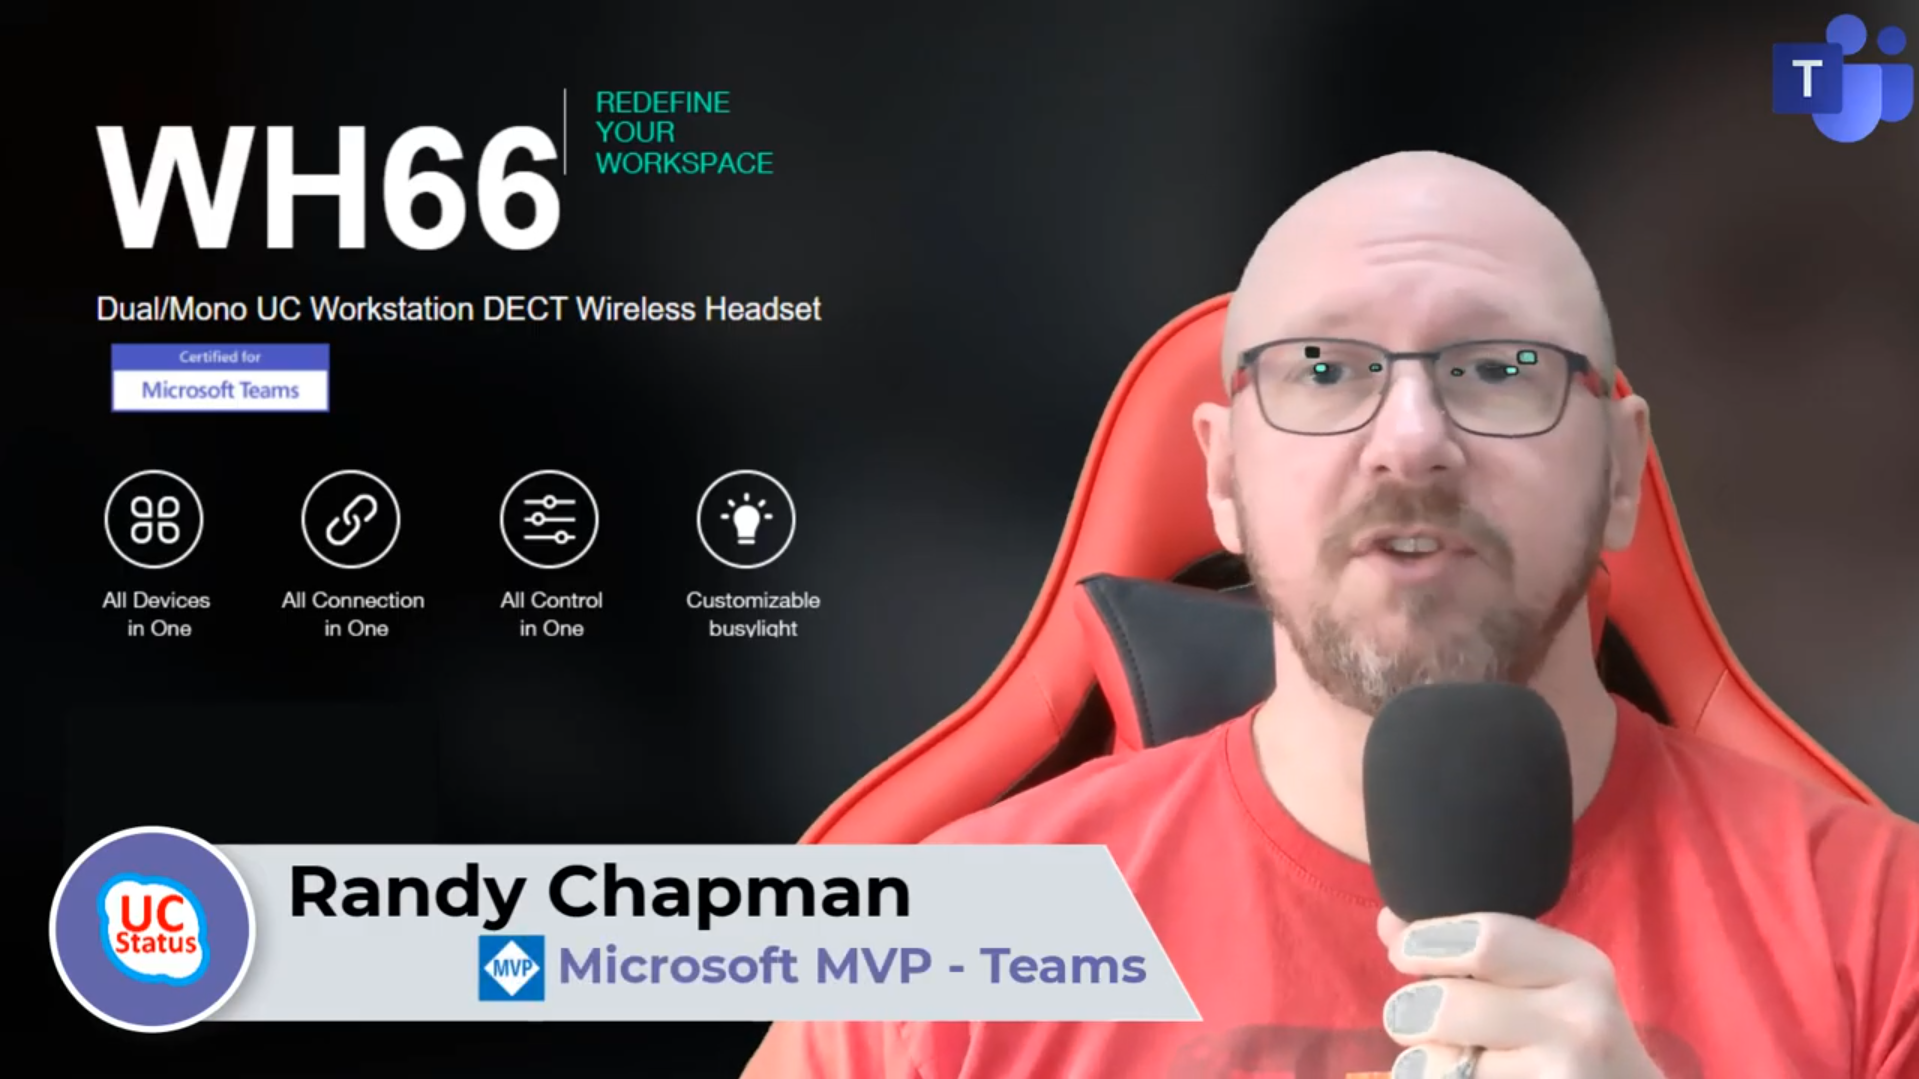 WH66 Review Video from Microsoft MVP